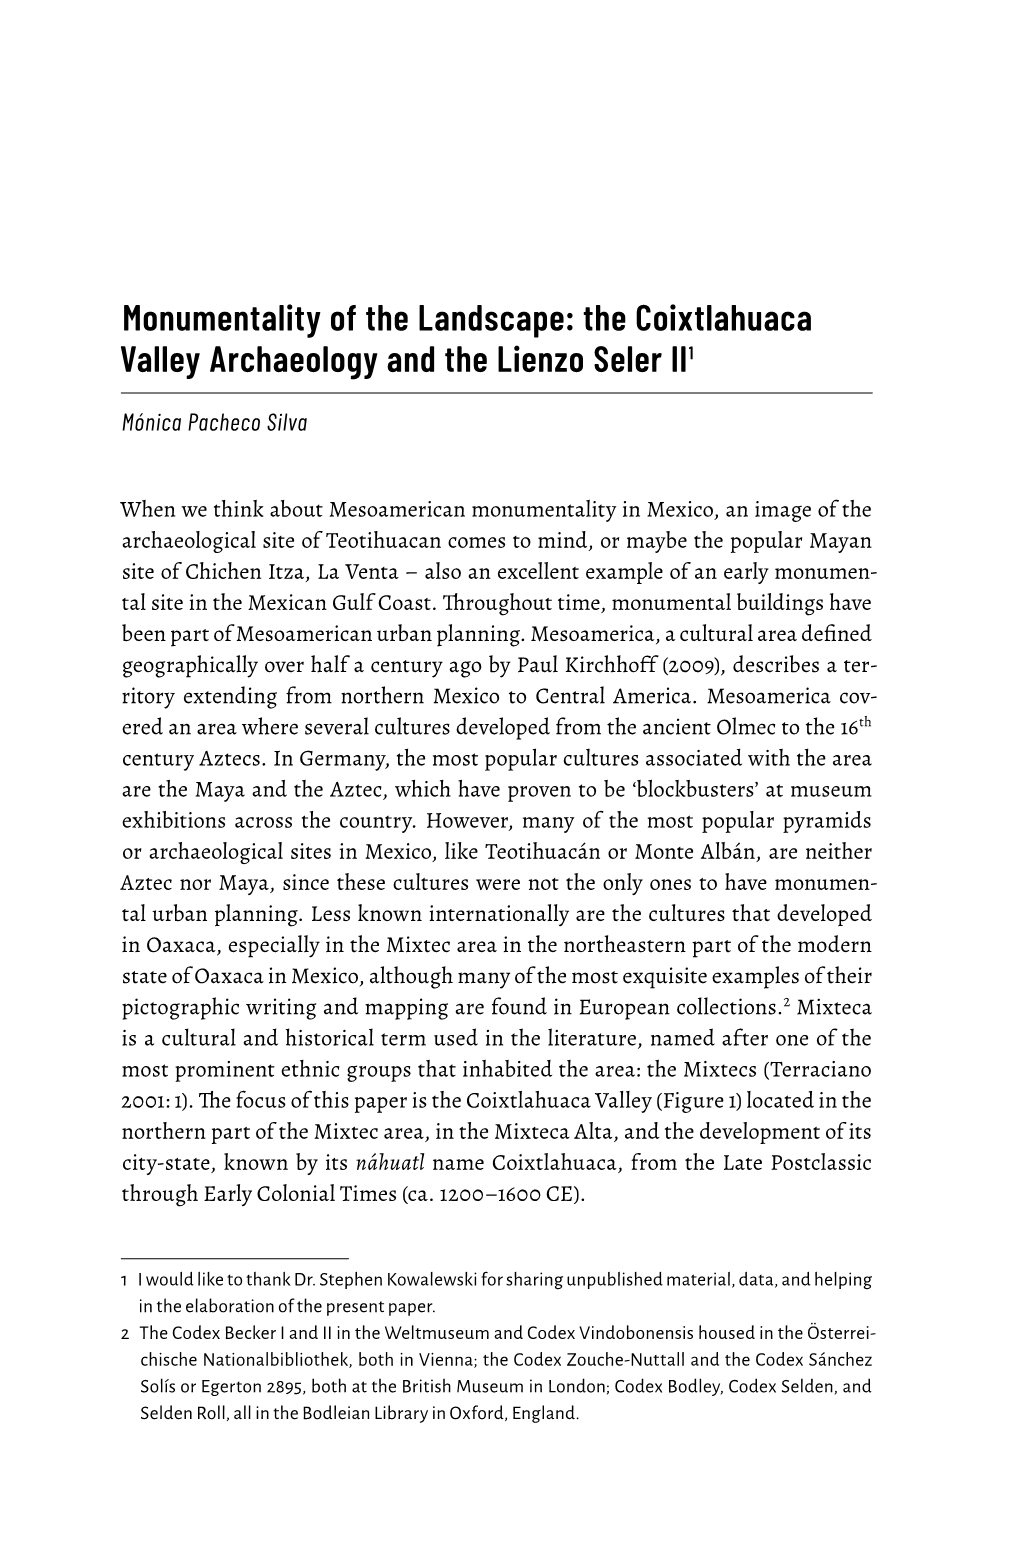 Monumentality of the Landscape: the Coixtlahuaca Valley Archaeology and the Lienzo Seler II 1